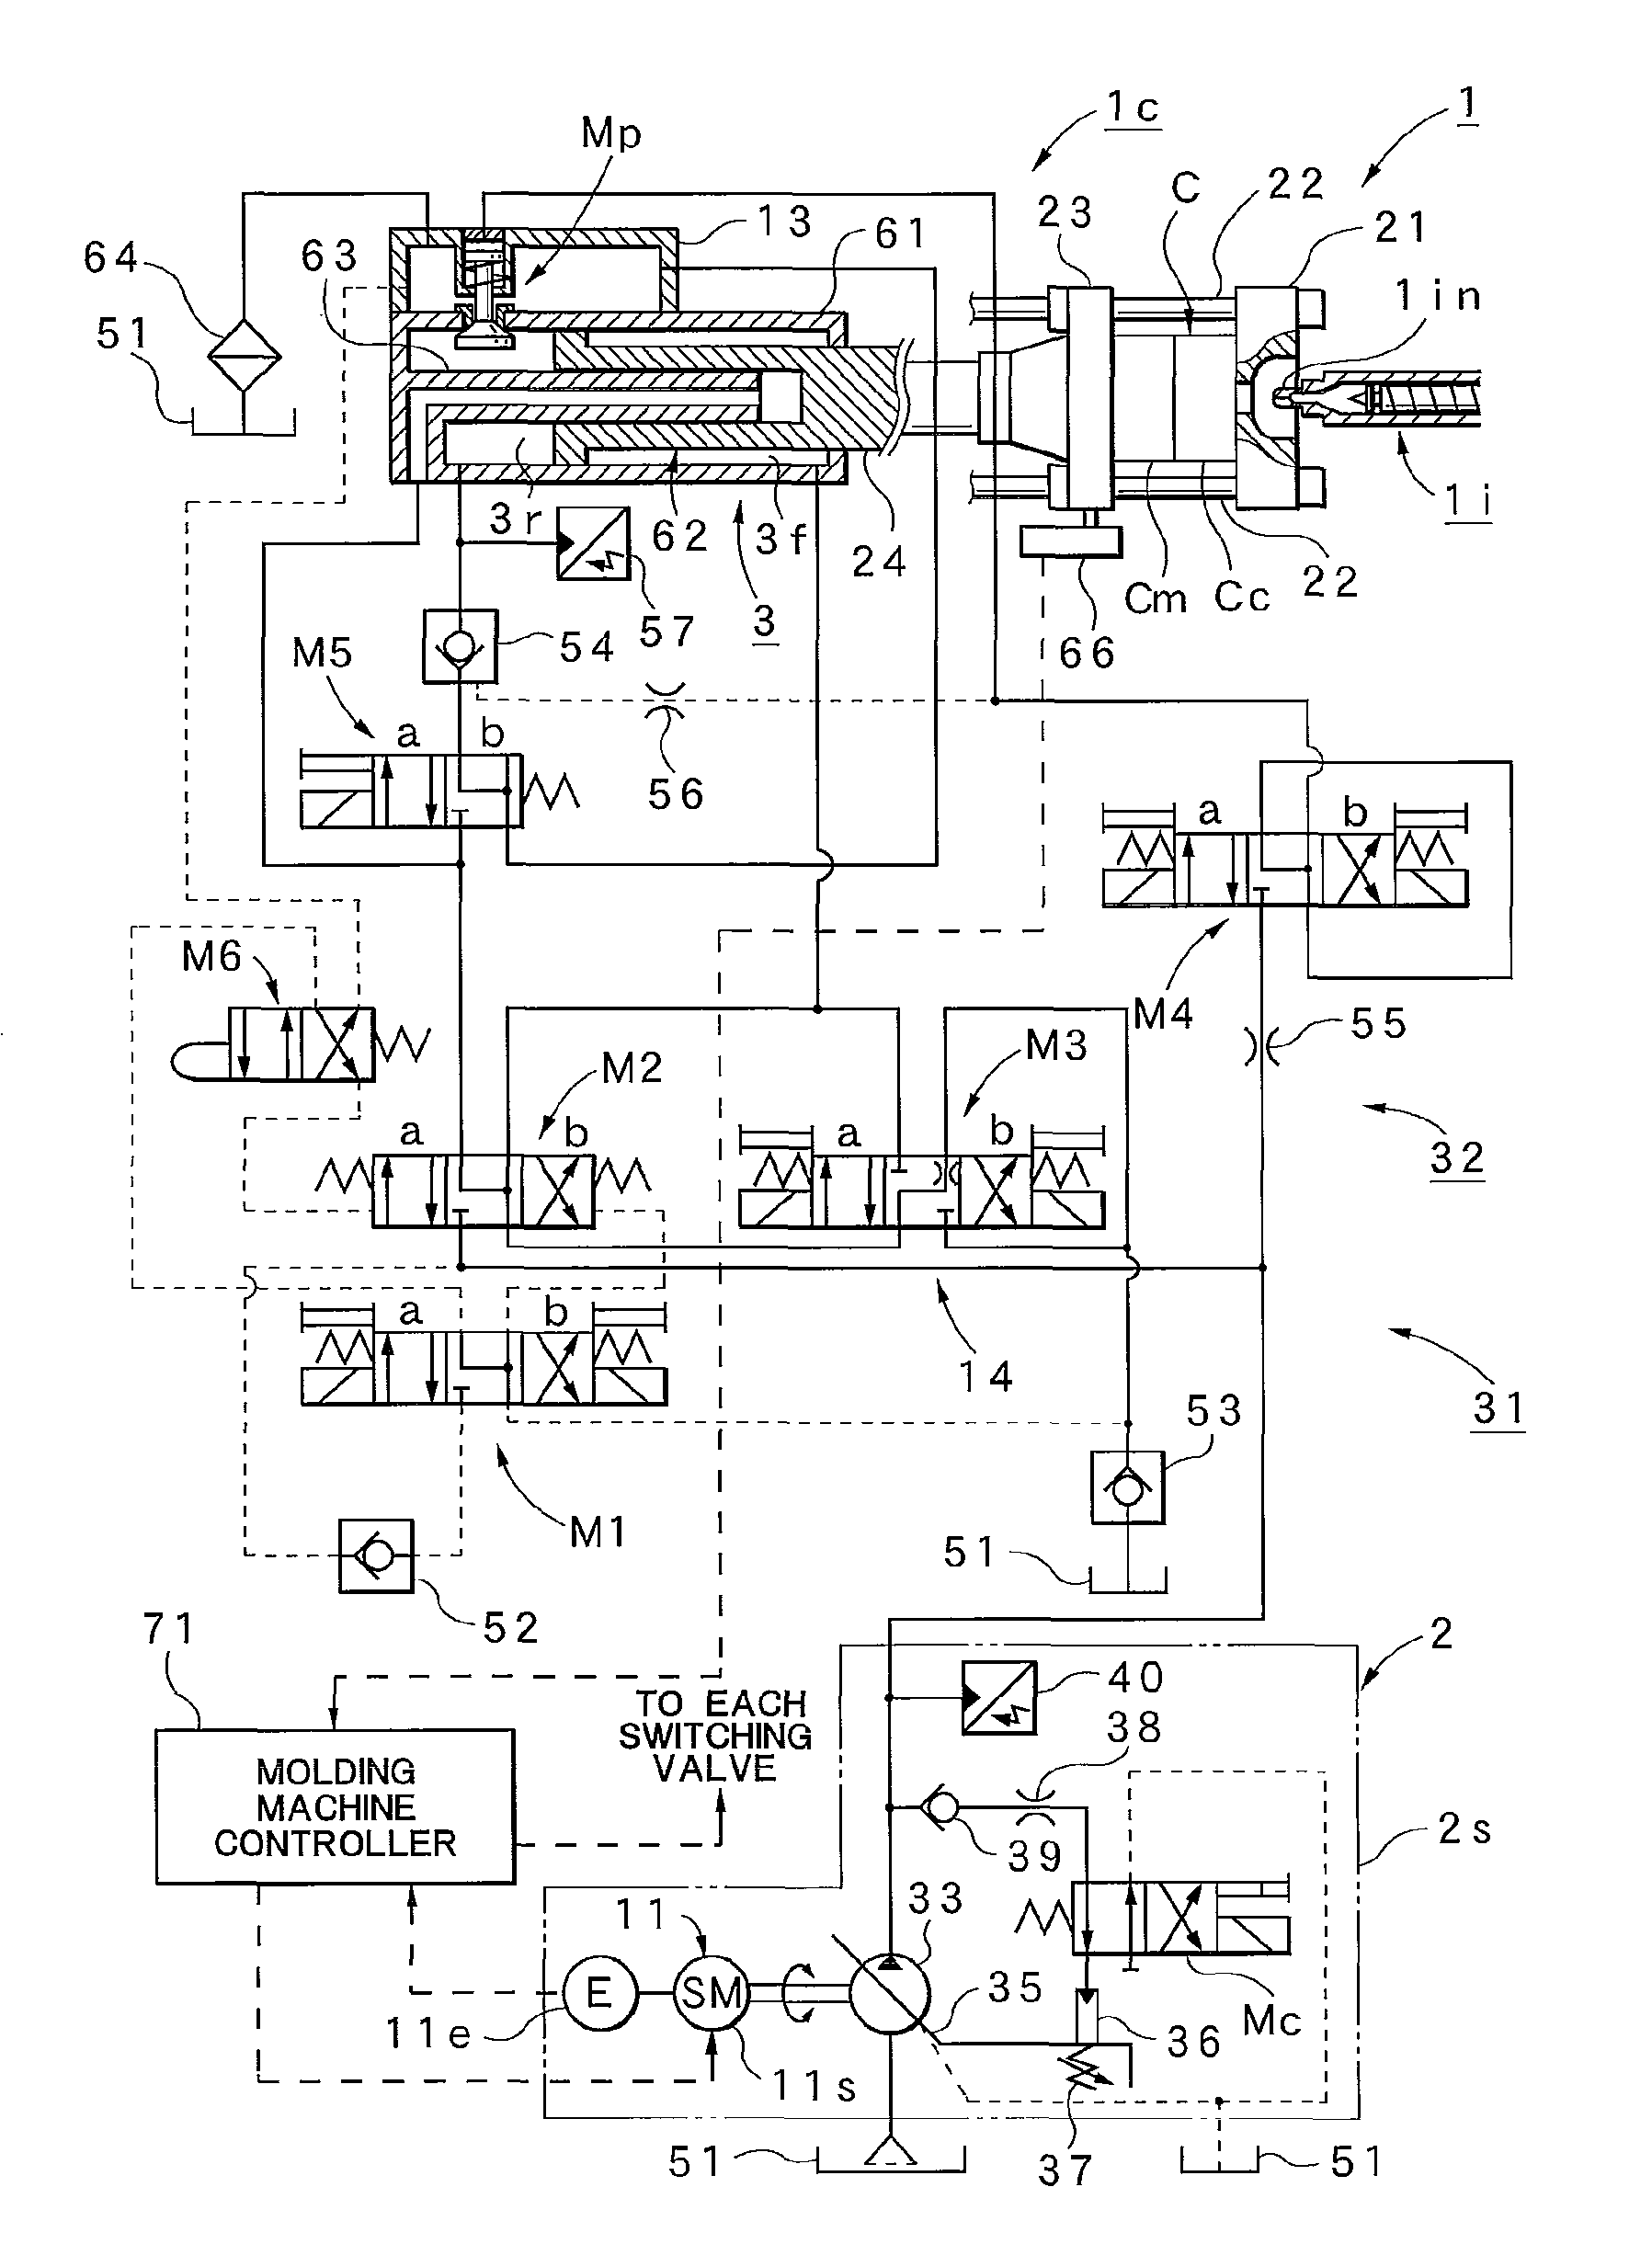 Method for controlling mold clamping device